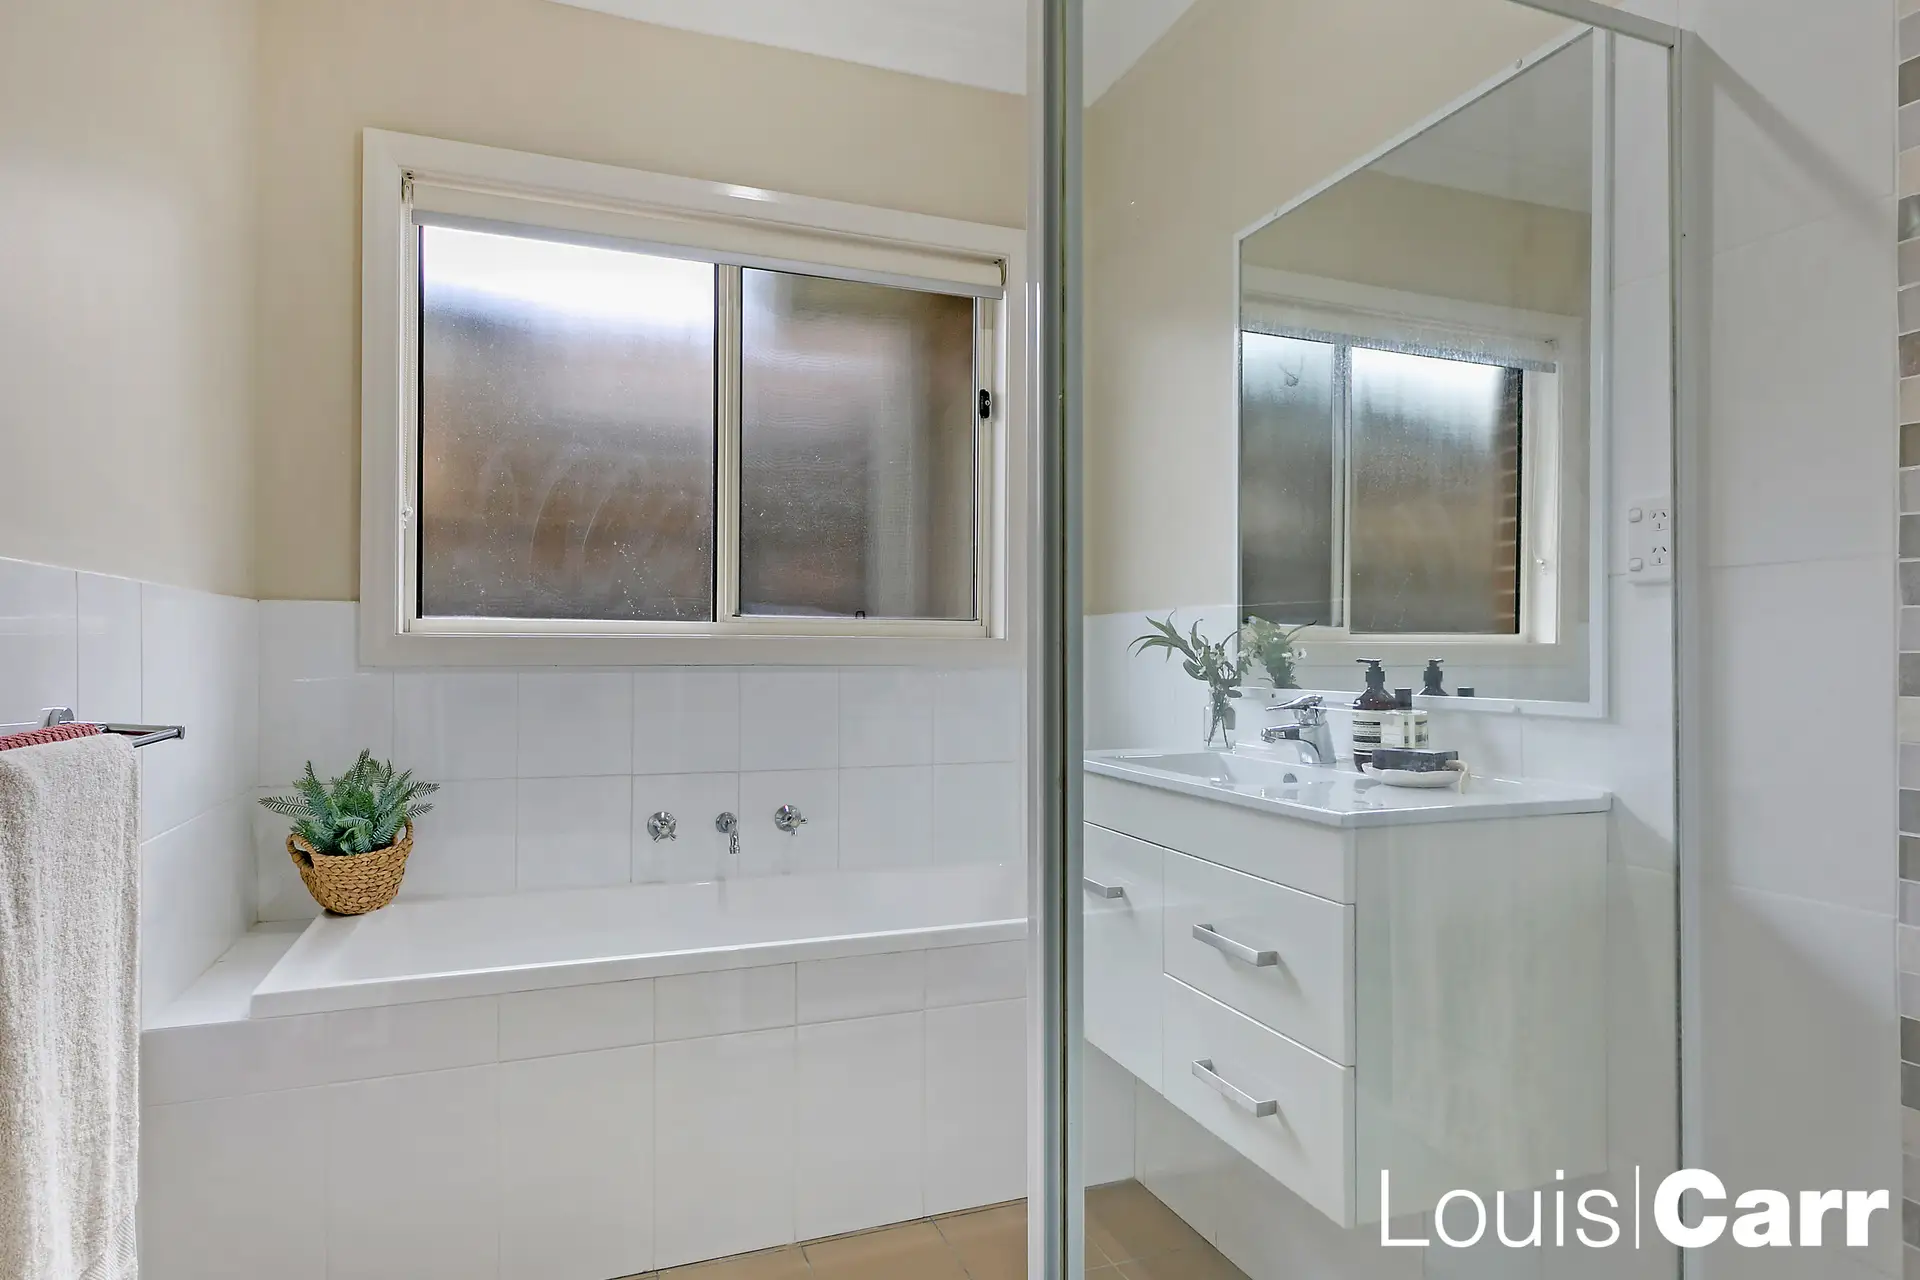 Photo #9: 7 Holly Street, Rouse Hill - Sold by Louis Carr Real Estate